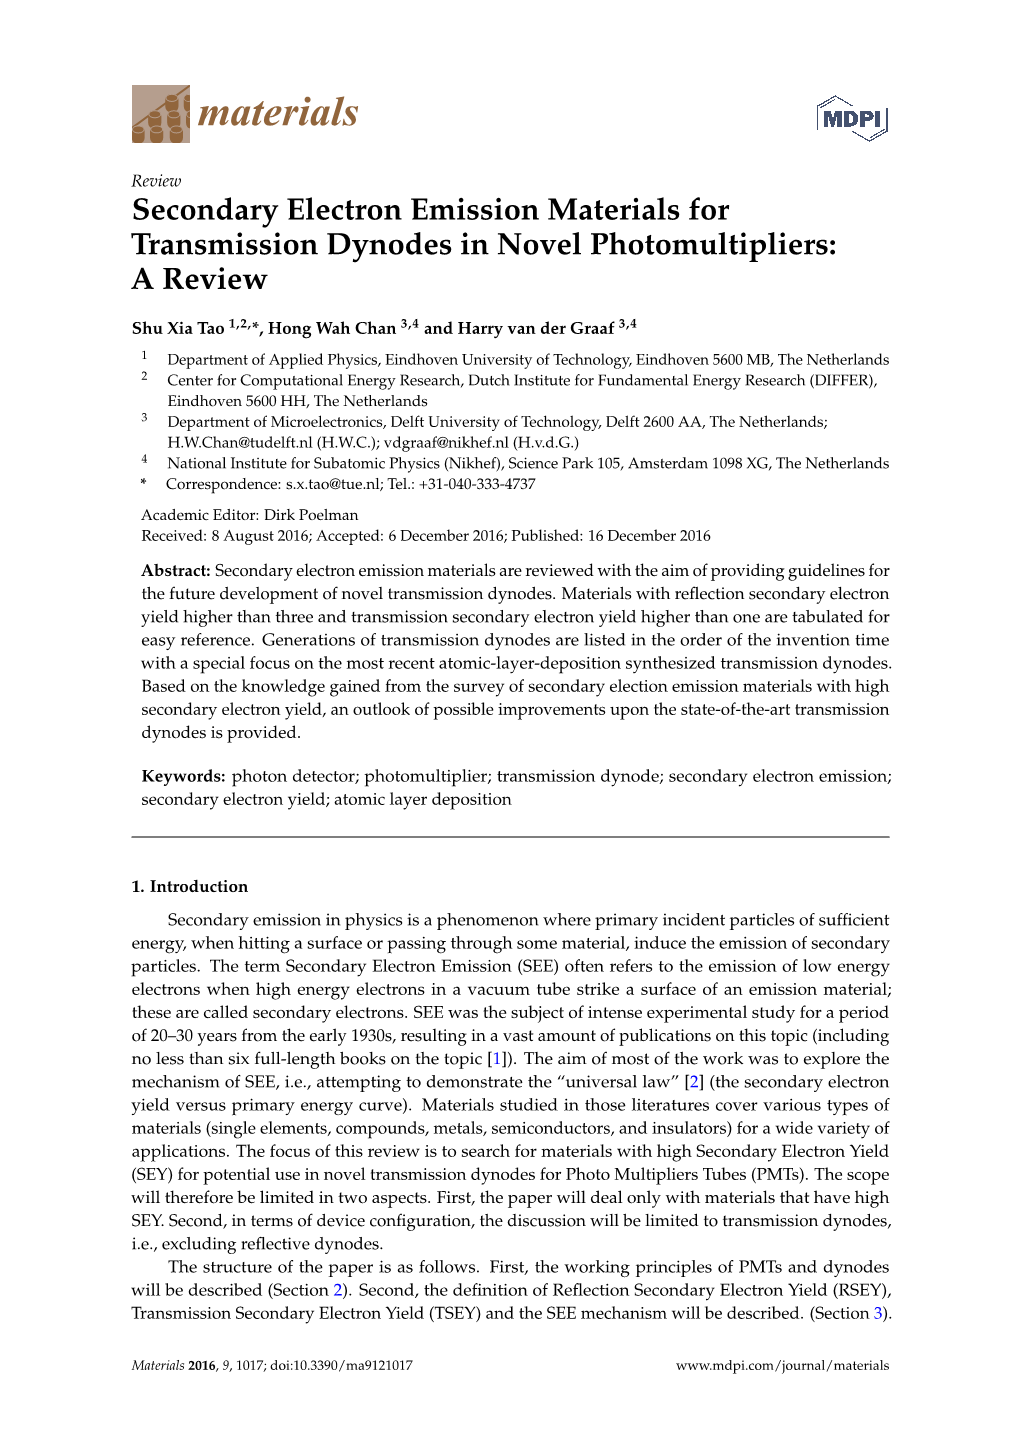 Secondary Electron Emission Materials for Transmission Dynodes in Novel Photomultipliers: a Review